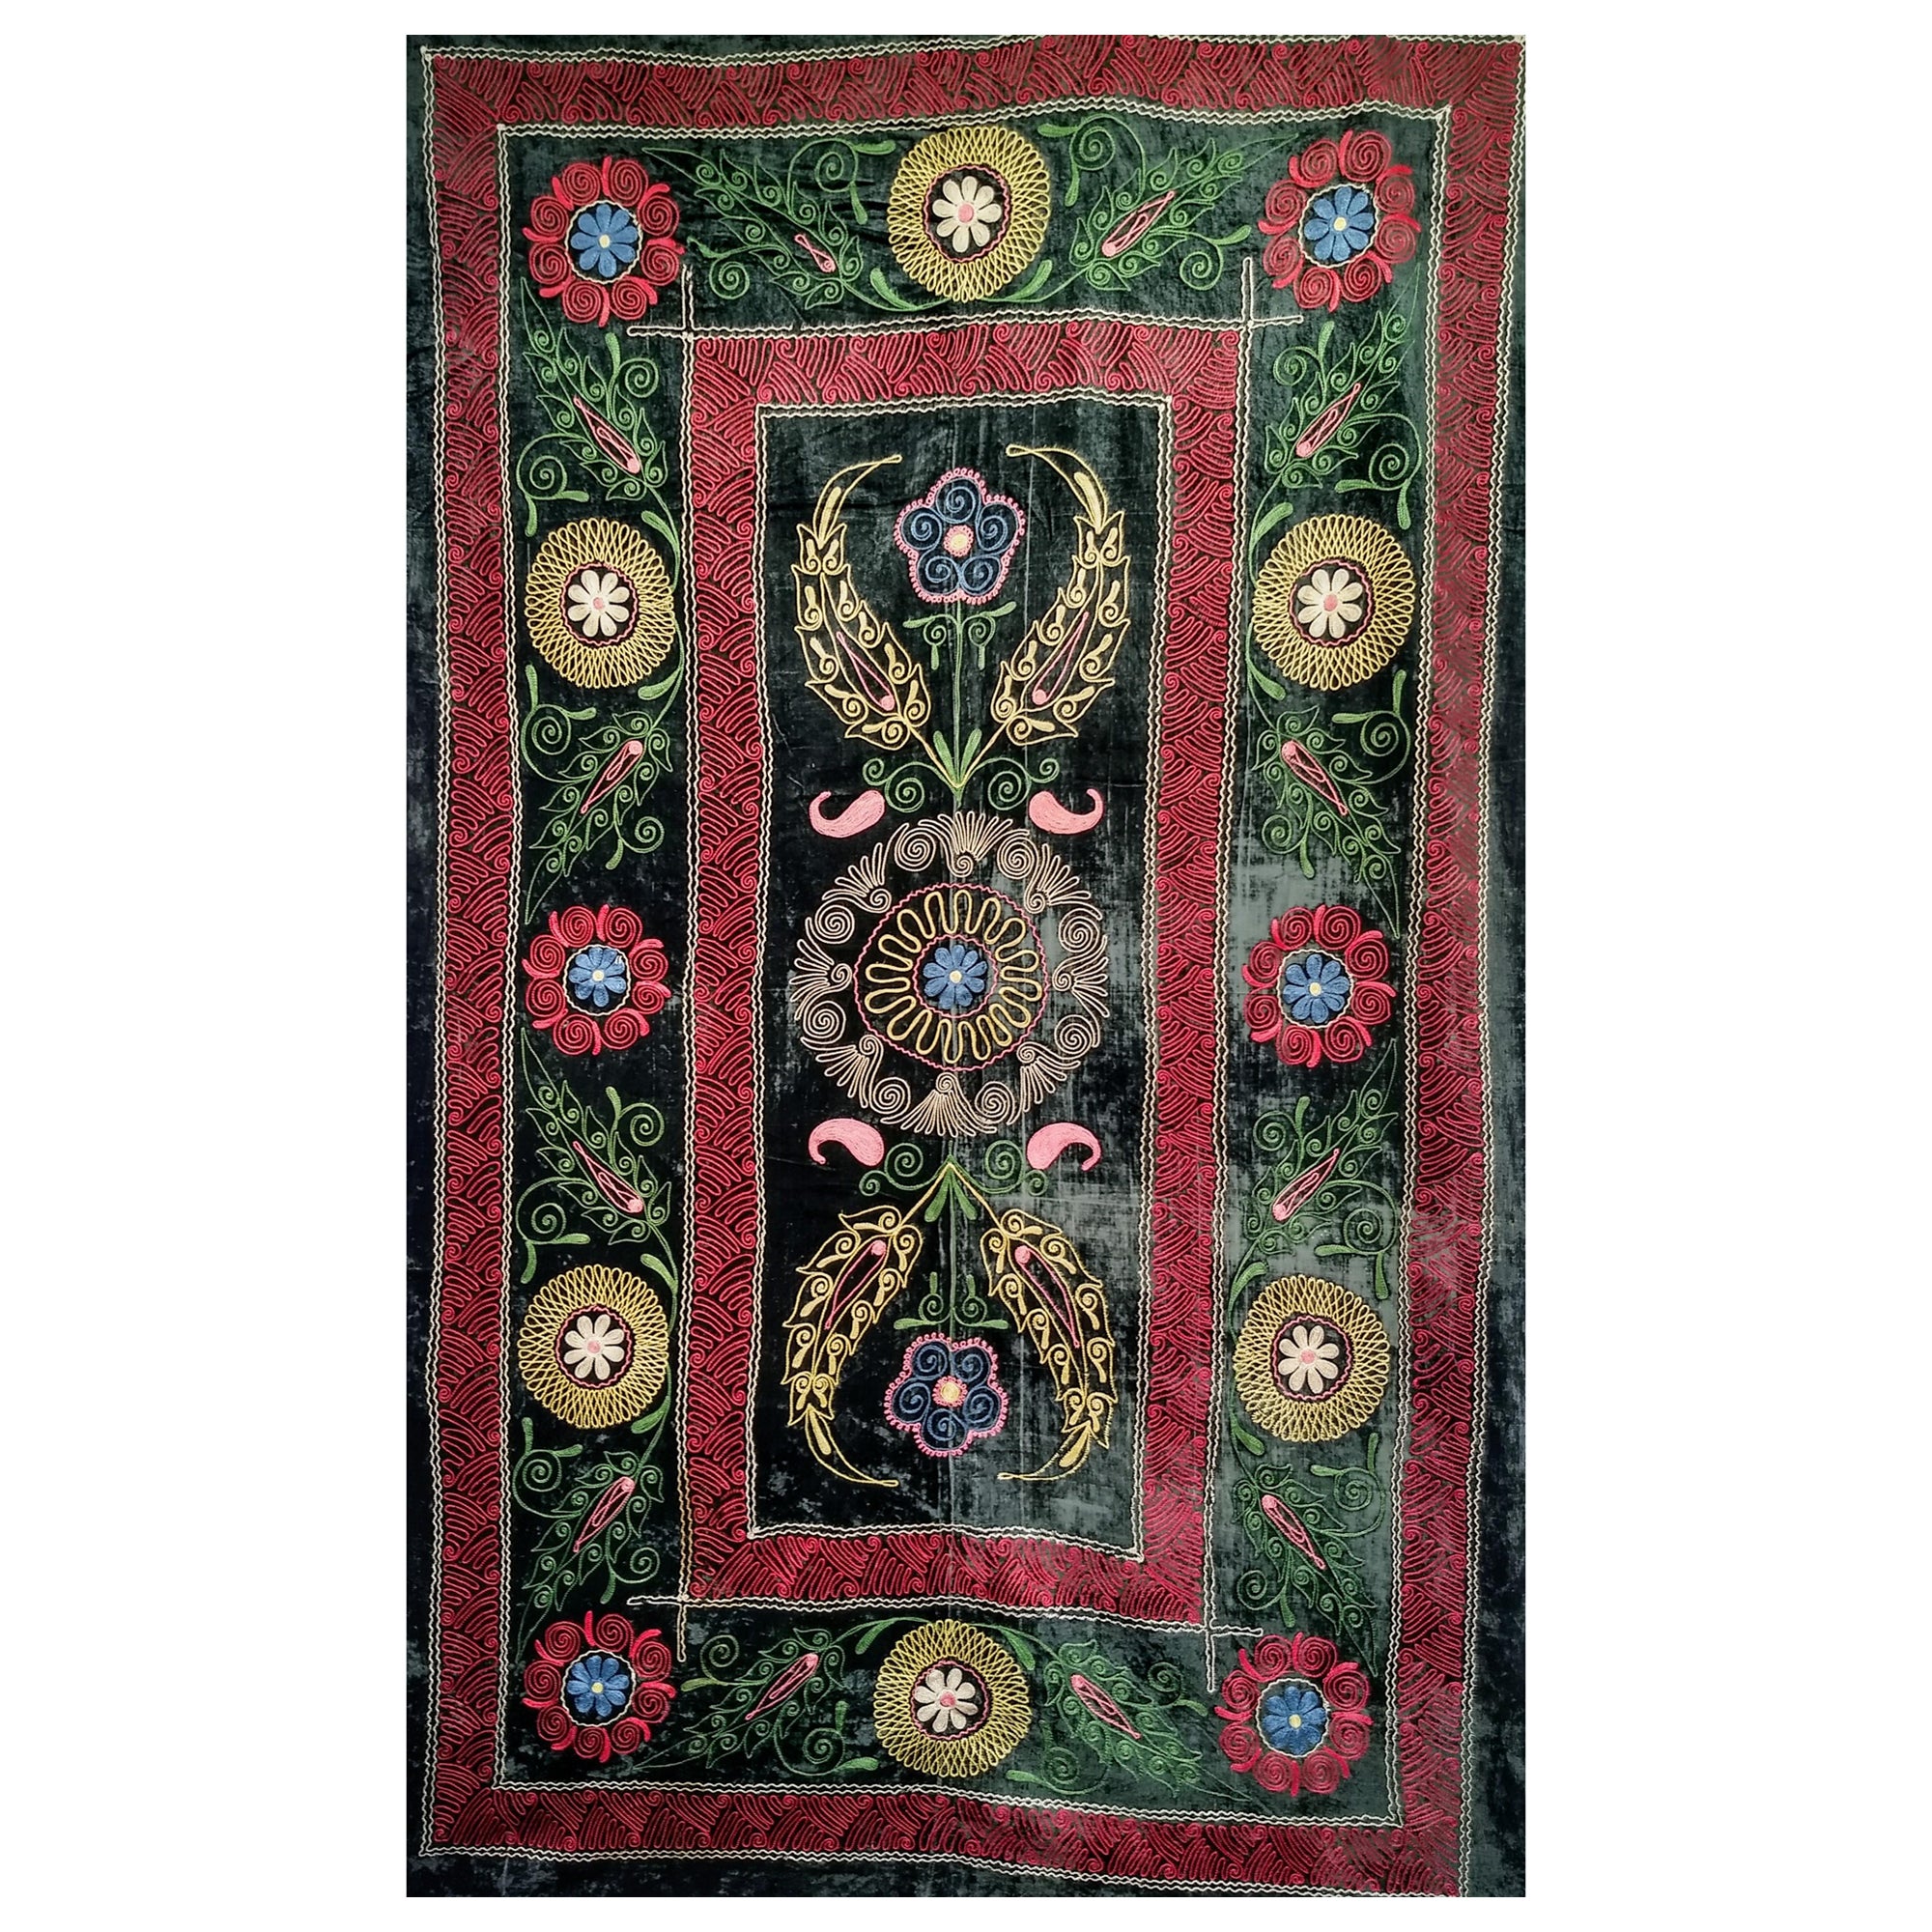 Vintage Uzbek Silk Embroidery Suzani in Black, Red, Green, Ivory, Blue For Sale